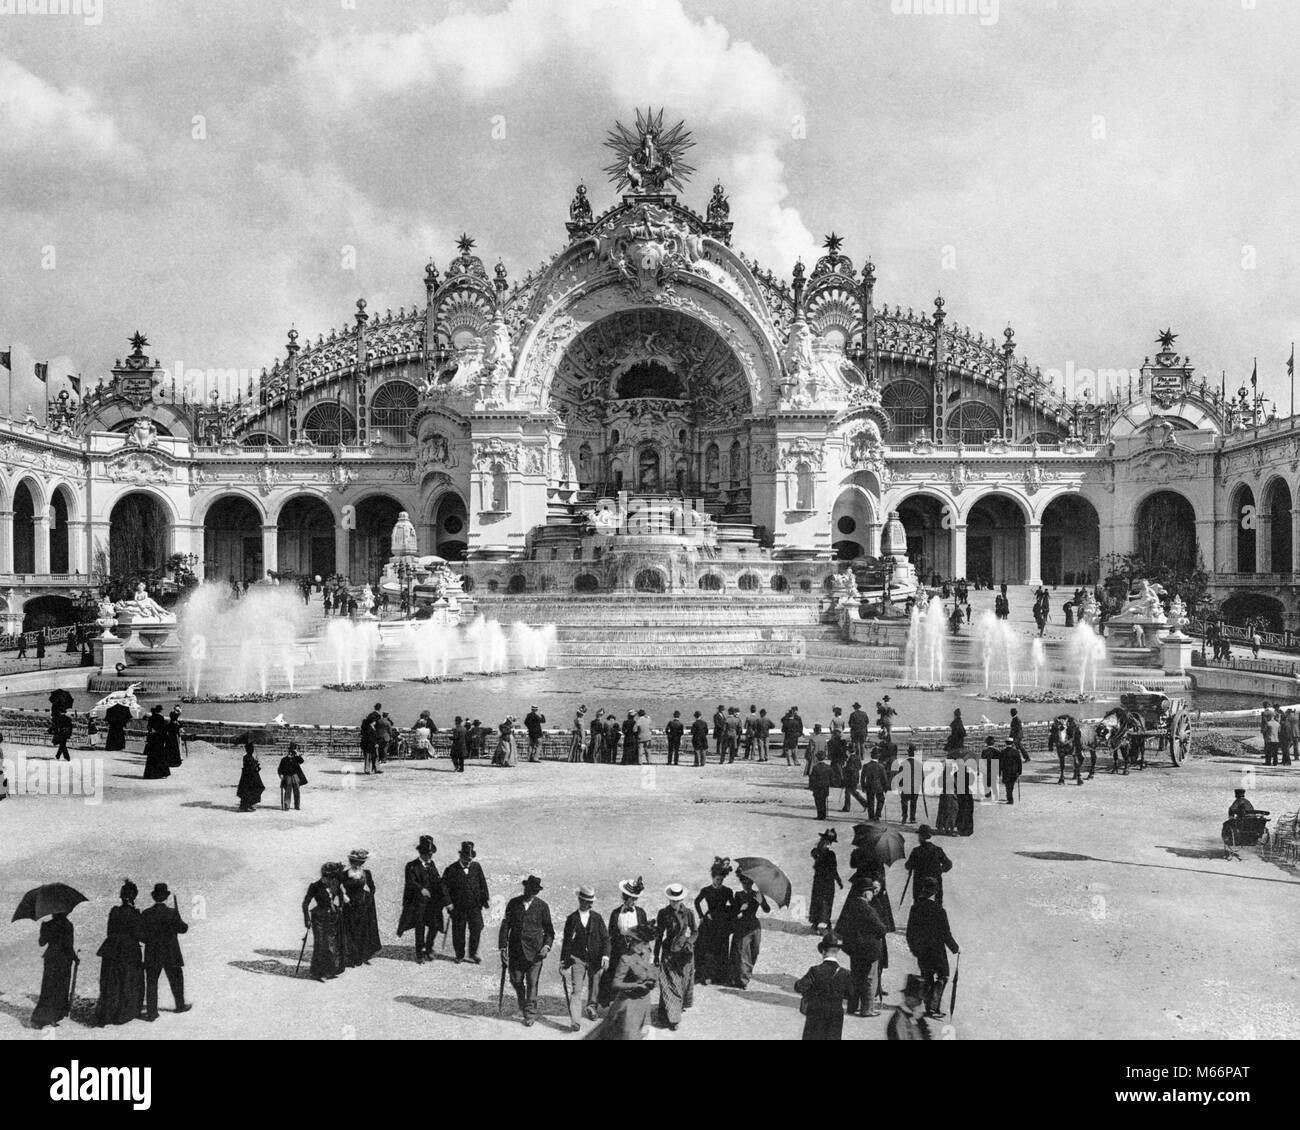 1900 CHATEAU OF WATER AT THE PARIS EXPOSITION WITH PALACE OF ELECTRICITY BEHIND UNIVERSELLE WORLD'S FAIR PARIS FRANCE - q66109 CPC001 HARS MALES B&W BLACK AND WHITE CHATEAU EXPO EXPOSITION EXPOSITION UNIVERSELLE LOUIS XV STYLE OLD FASHIONED PERSONS UNIVERSELLE Stock Photo